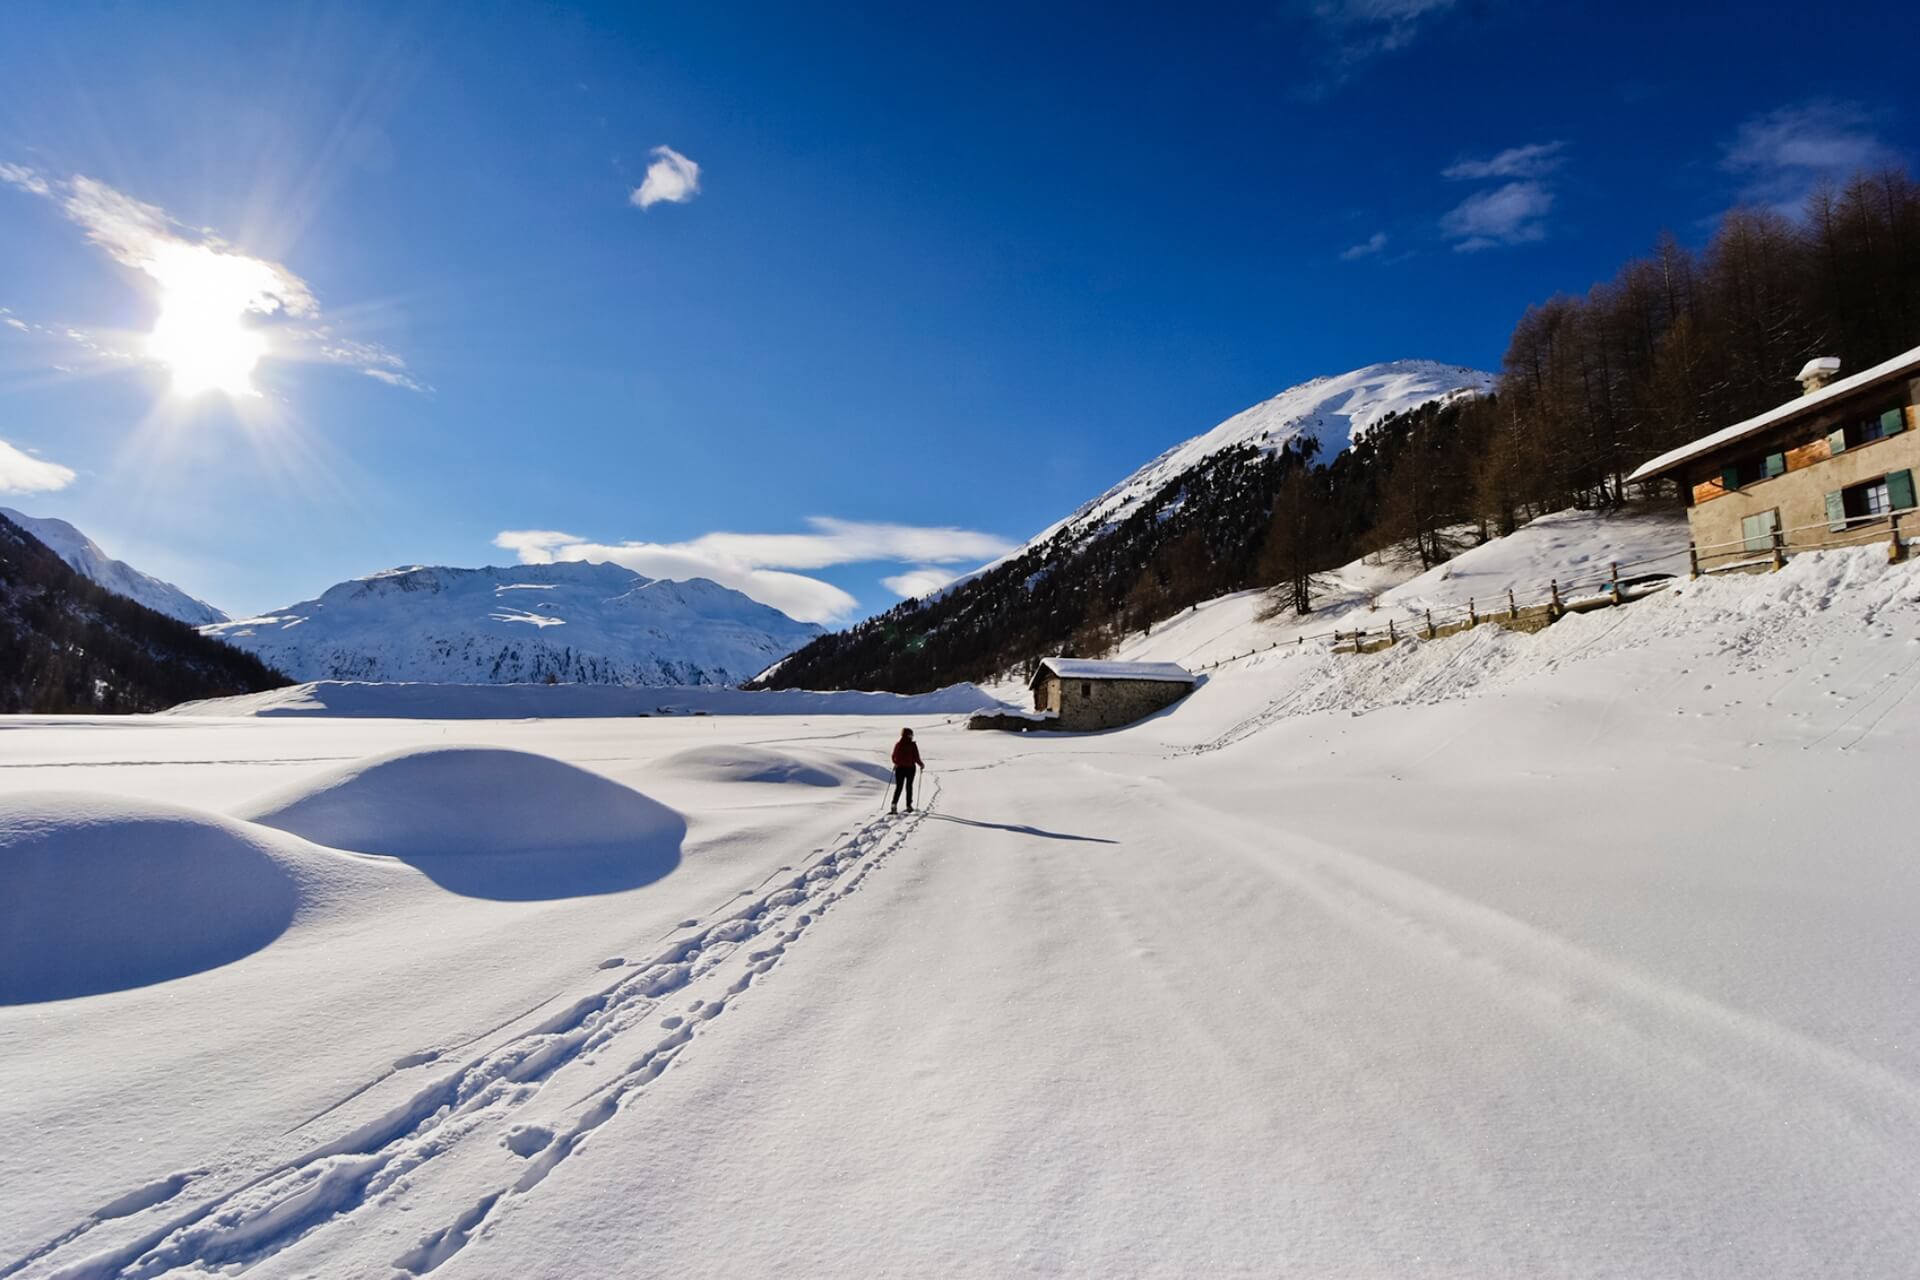 hiking on the snow in Livigno